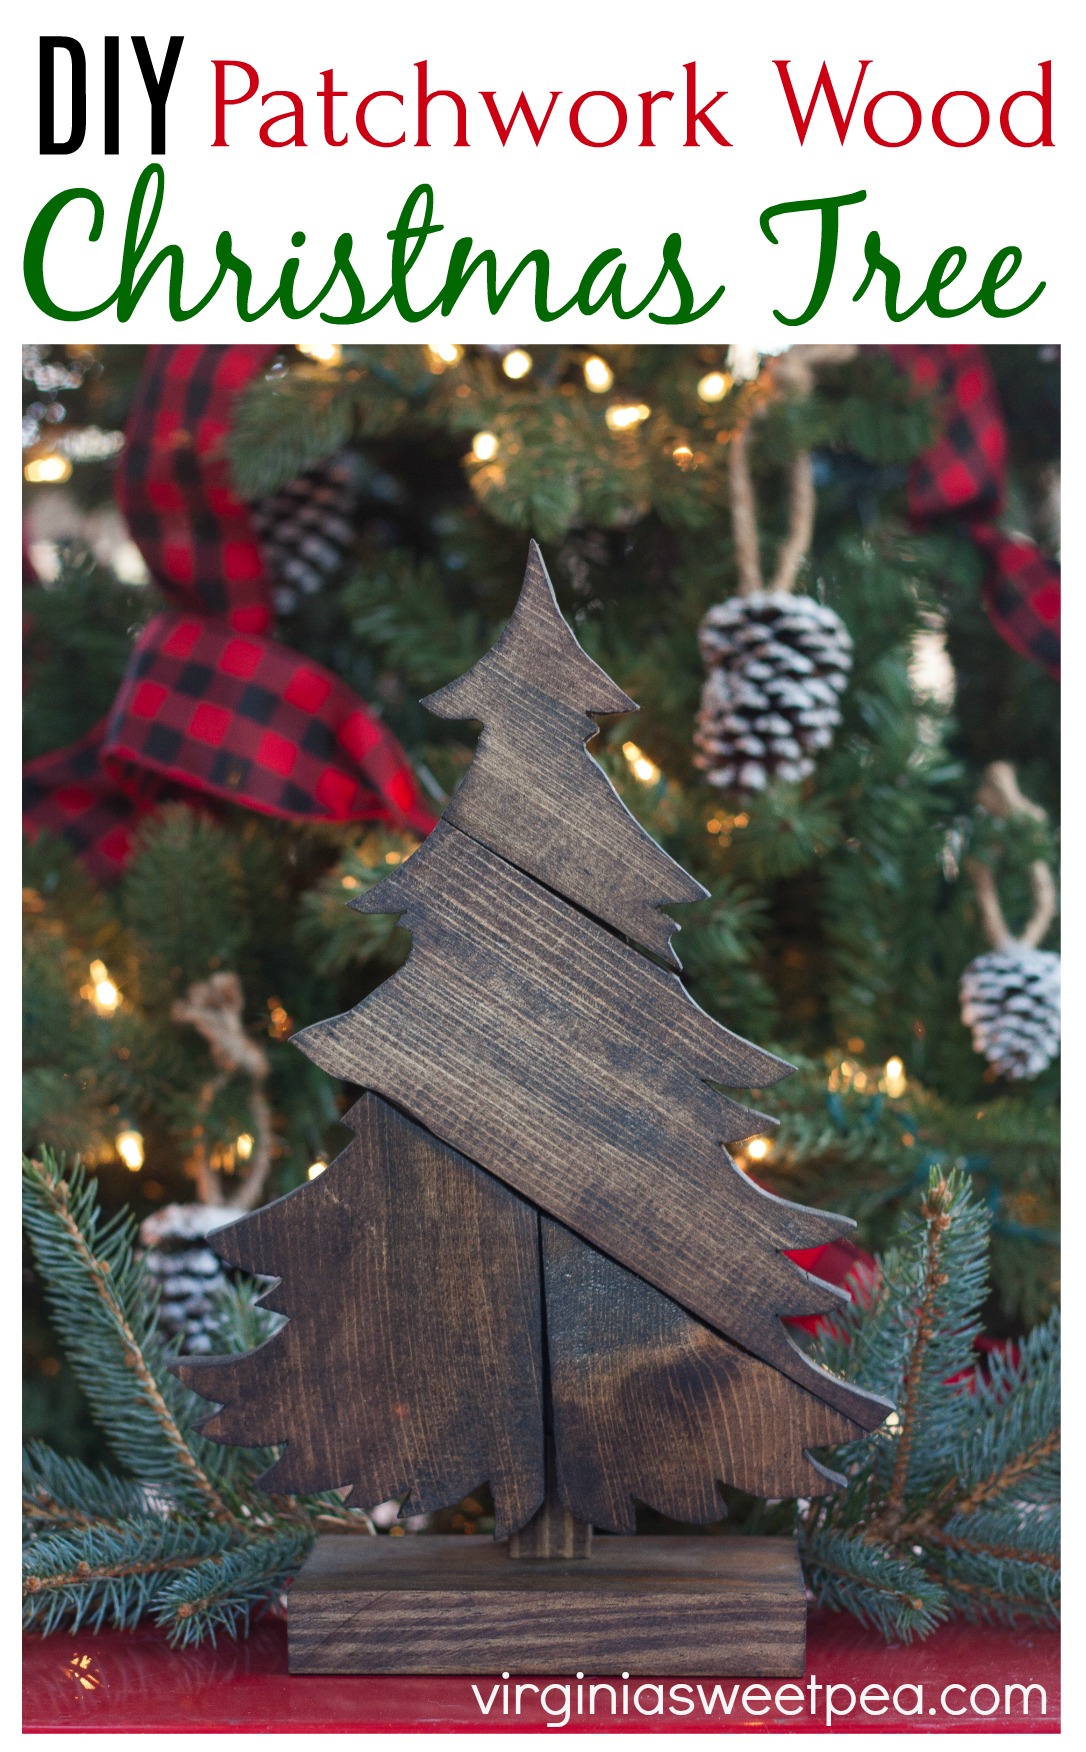 DIY Patchwork Wood Christmas Tree - Make this tree using scrap wood and customize with stain color. This project makes a great gift! #christmas #woodworking #christmasdecoration #christmascraft #DIYChristmas